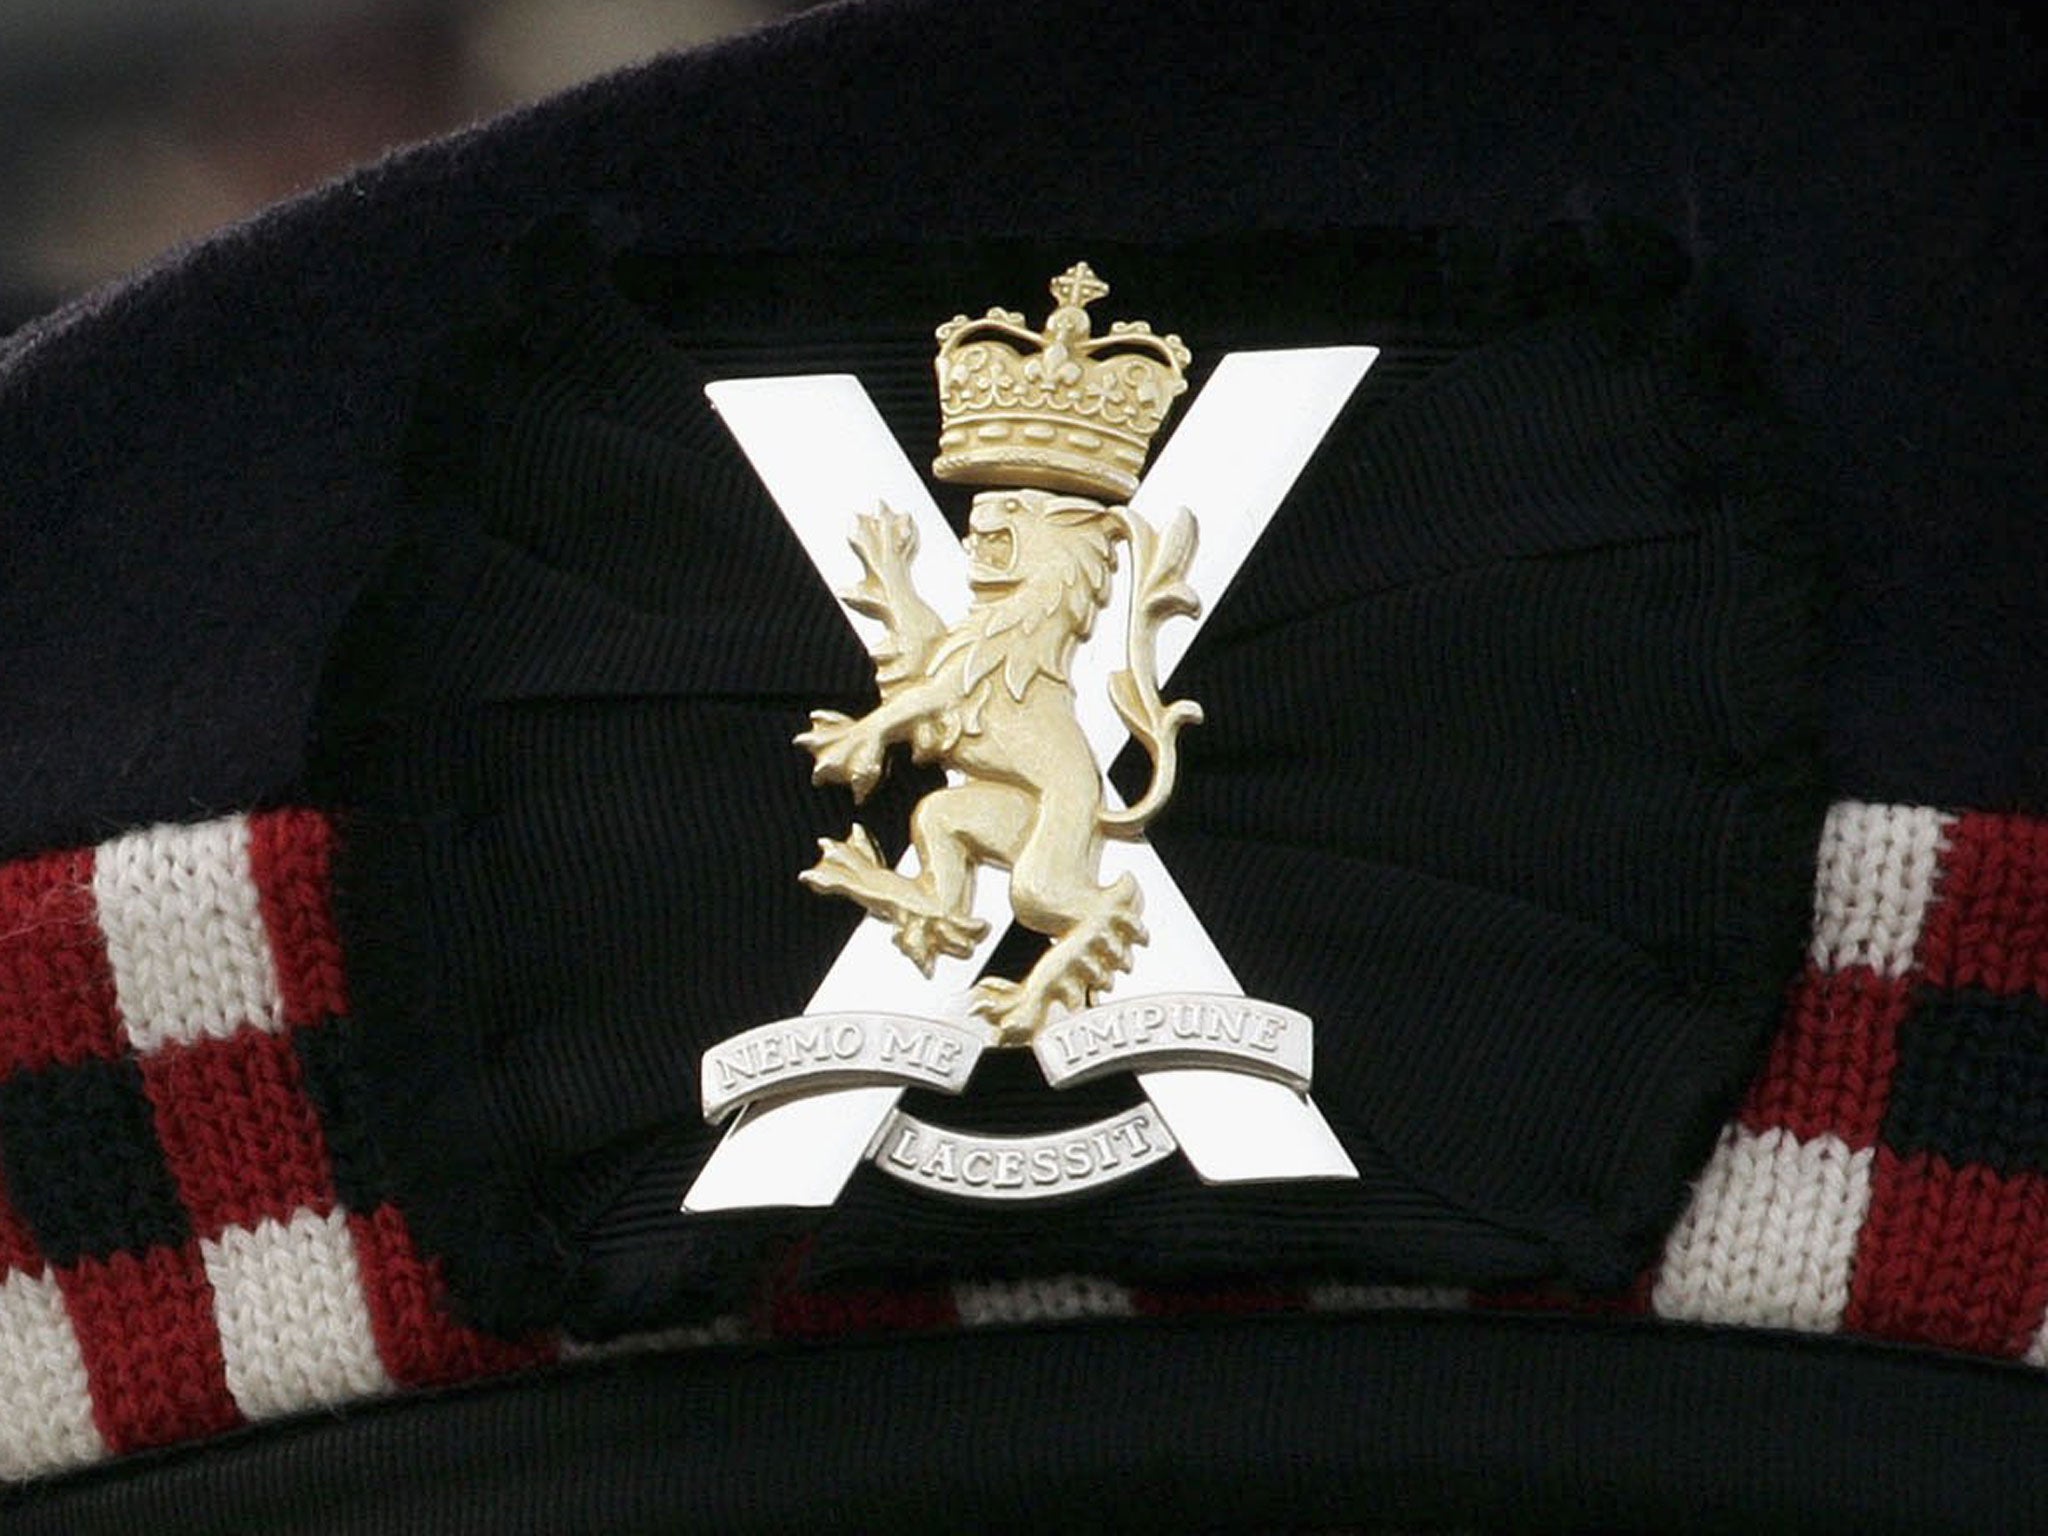 A court in Manhattan heard that the Royal Regiment of Scotland soldiers allegedly punched an NYPD officer to the floor and continued hitting him as a friend attempted to stop them.